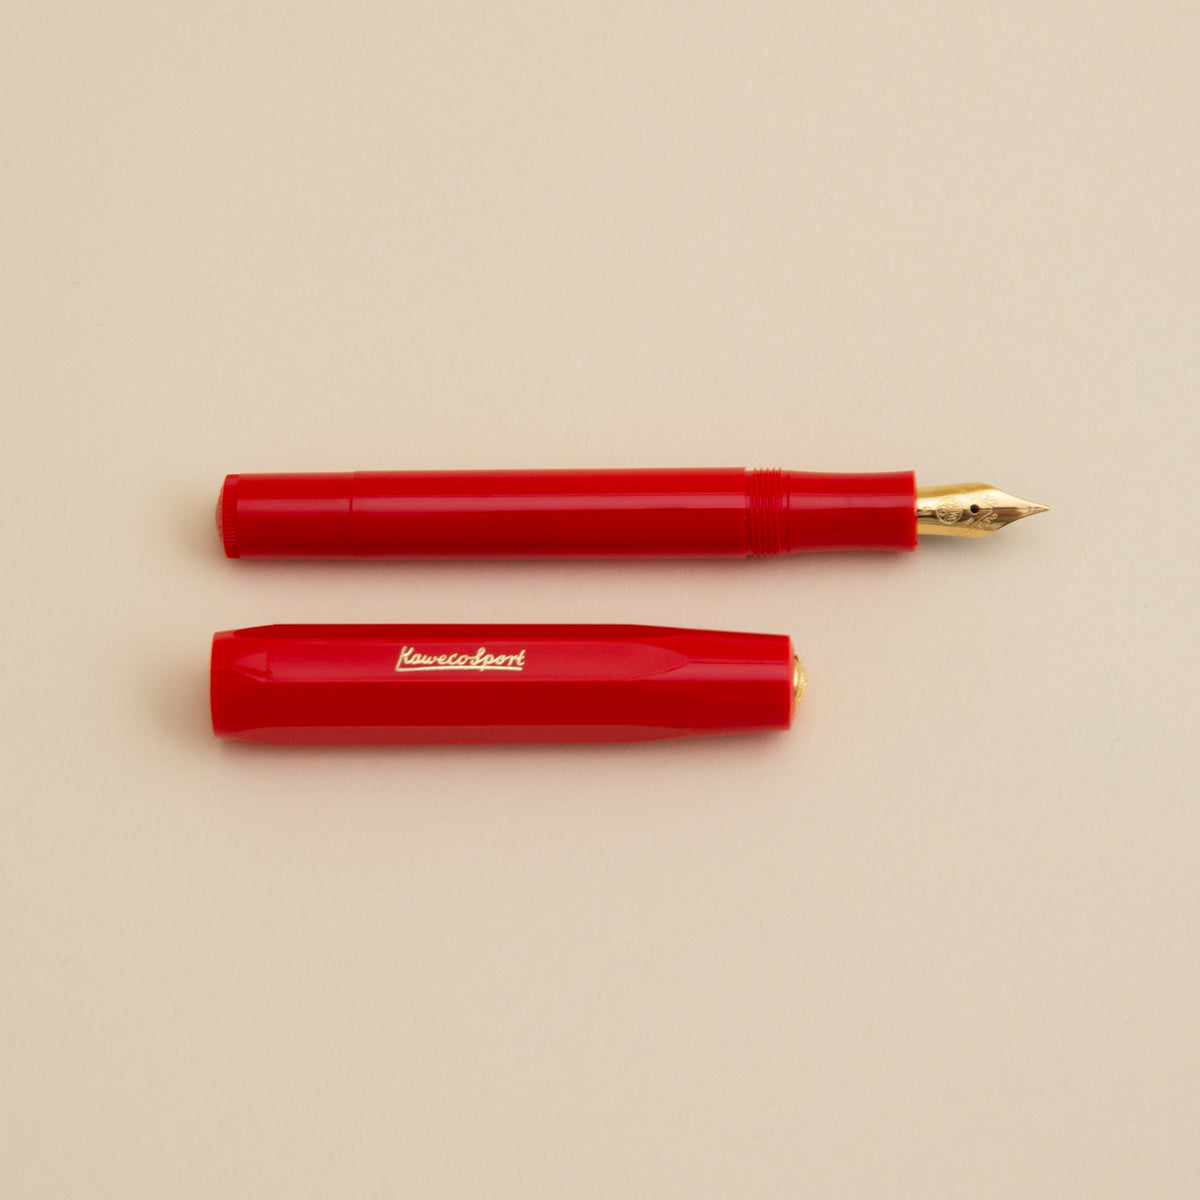 Kaweco Sport Fountain Pen - Red – The Good Liver